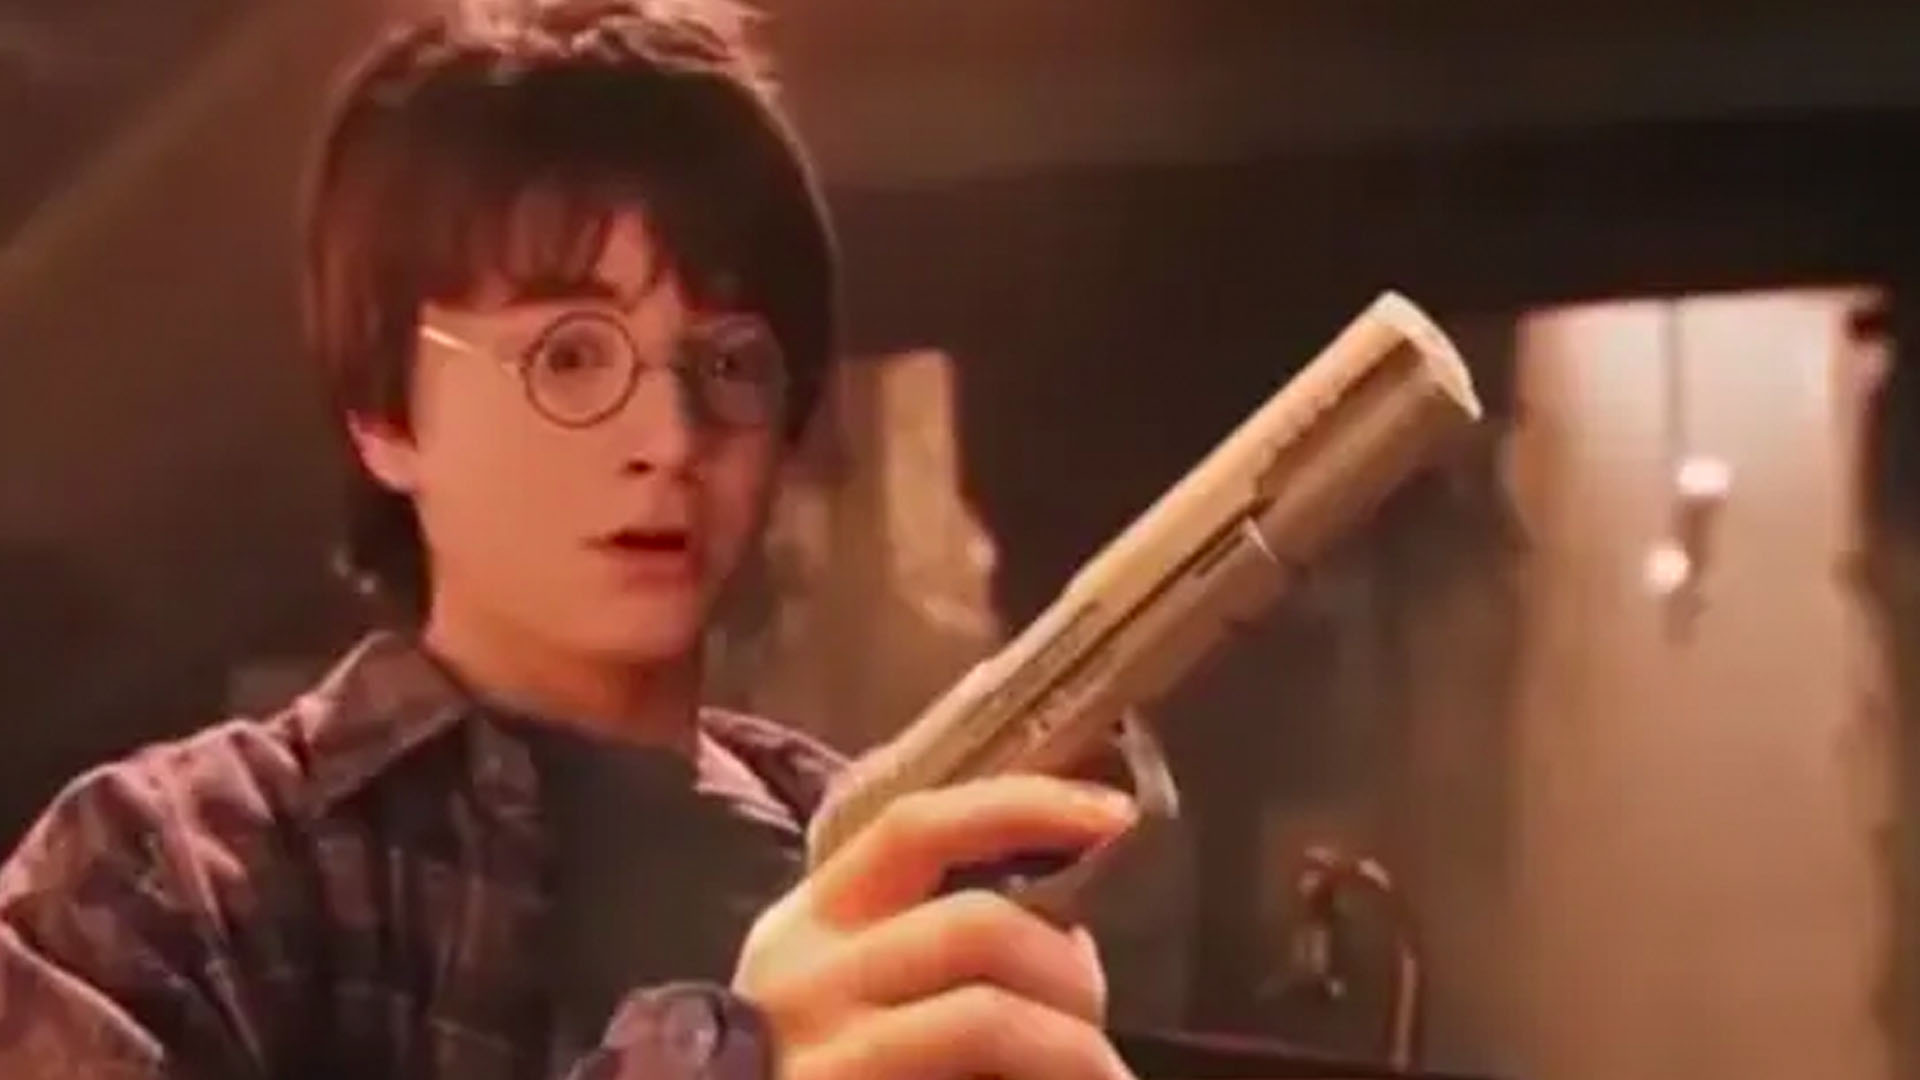 Entire Harry Potter film gets wands replaced by guns in fan edit